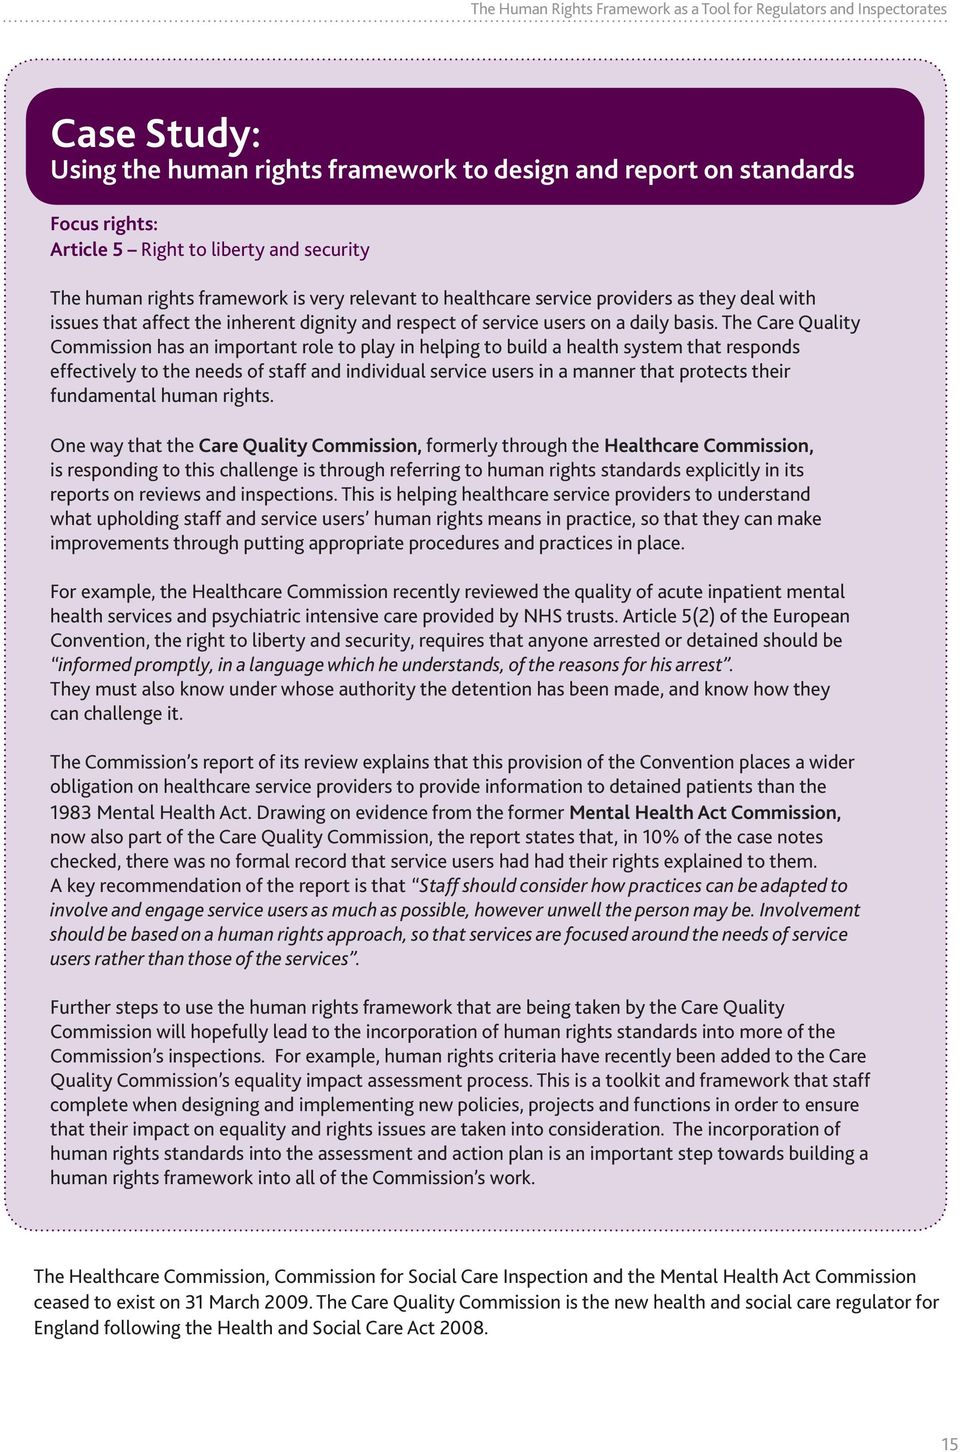 The Care Quality Commission has an important role to play in helping to build a health system that responds effectively to the needs of staff and individual service users in a manner that protects